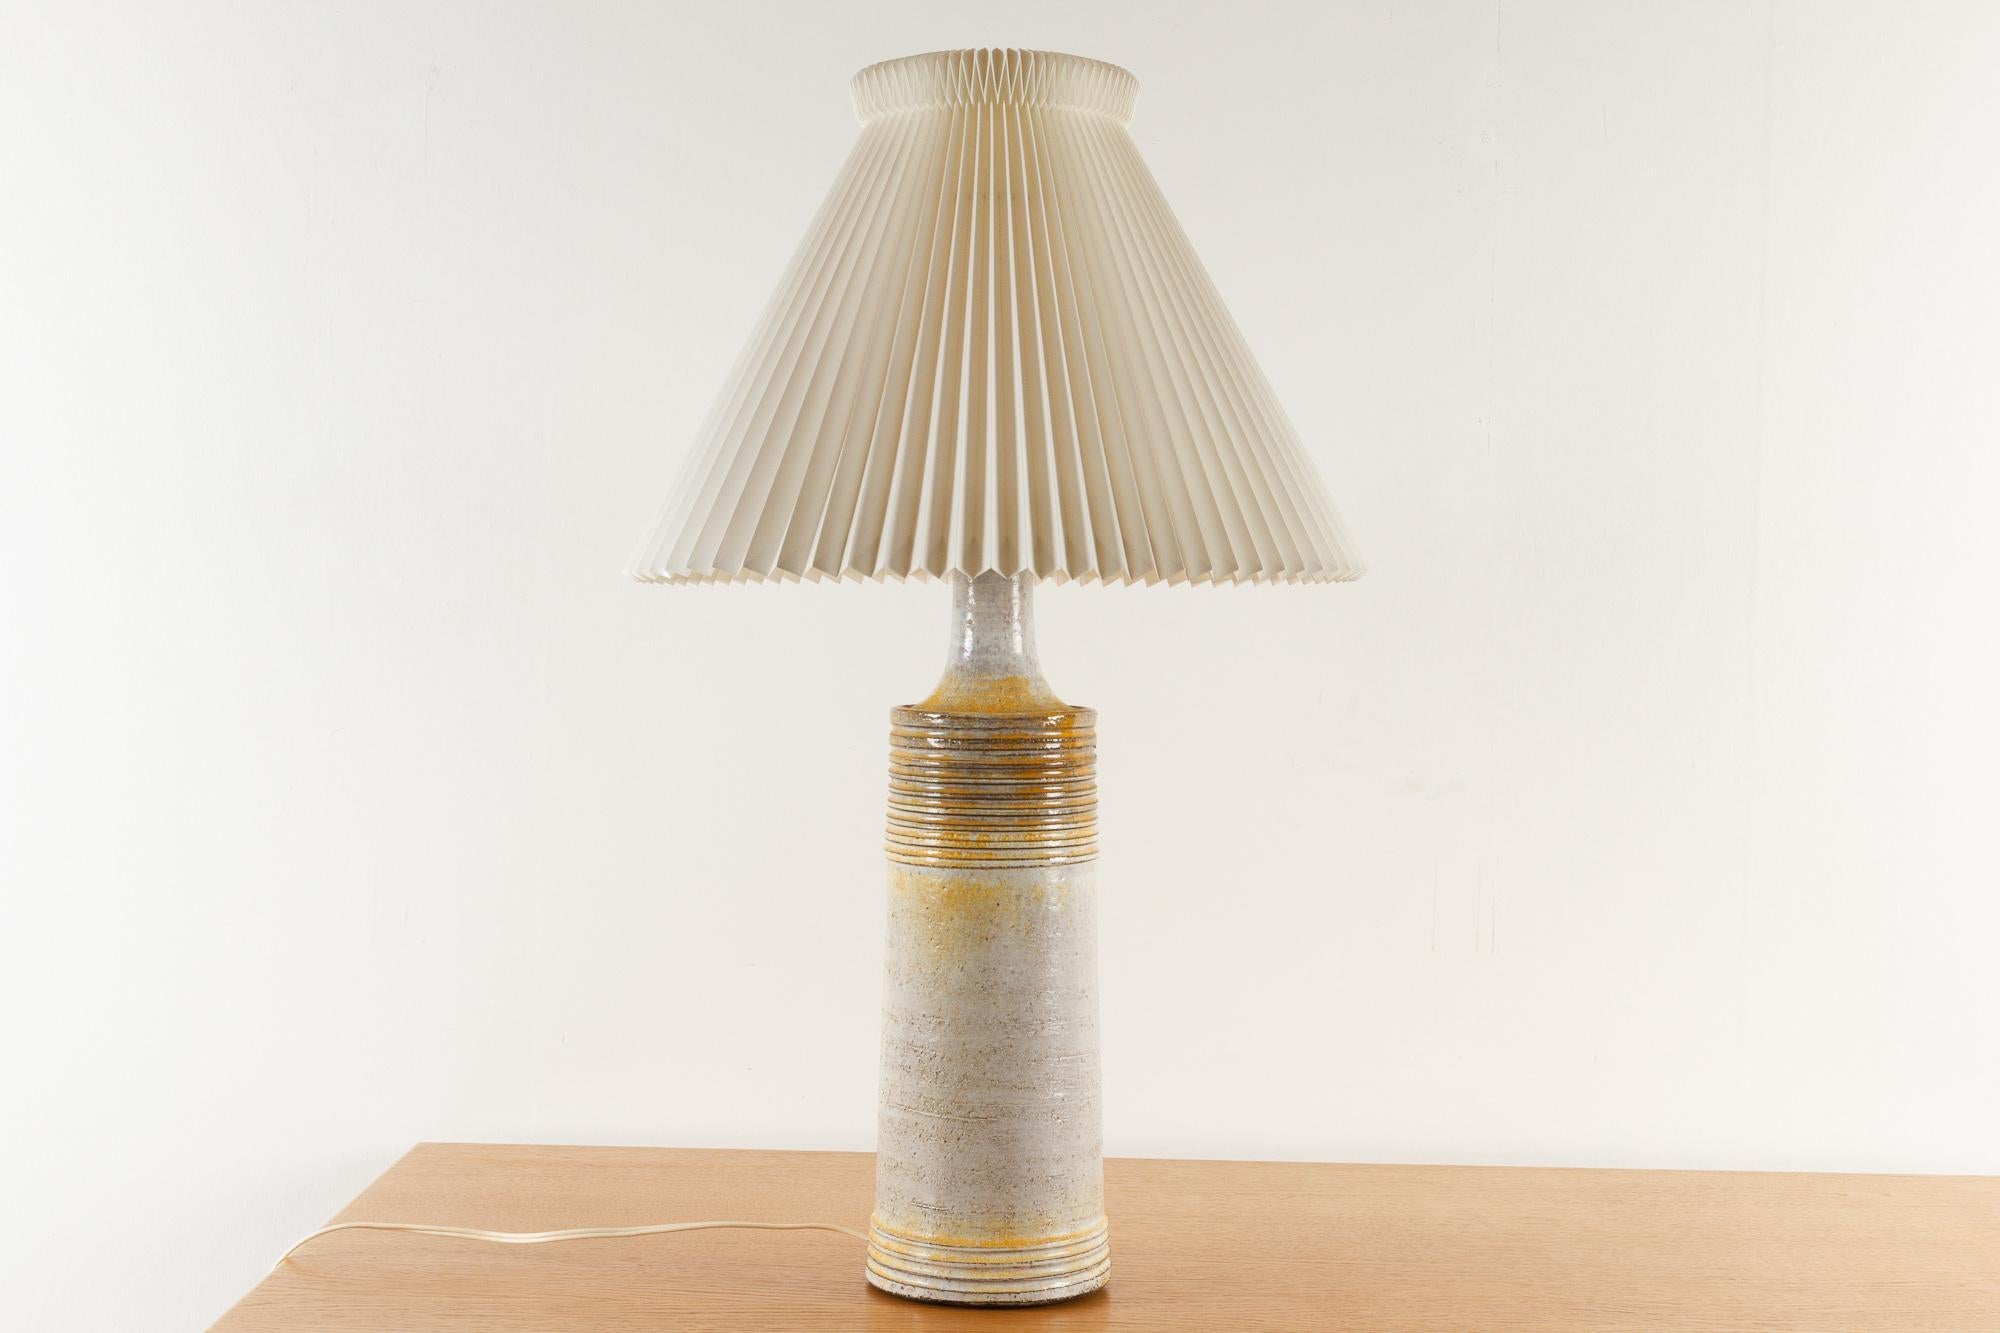 Danish Modern Ceramic Frimann table lamp, 1970s
Tall ceramic lamp in earth colors with yellow accents. Fitted with original pleated Le Klint shade.
Makers mark on socket.
E26/27
Very good original condition.